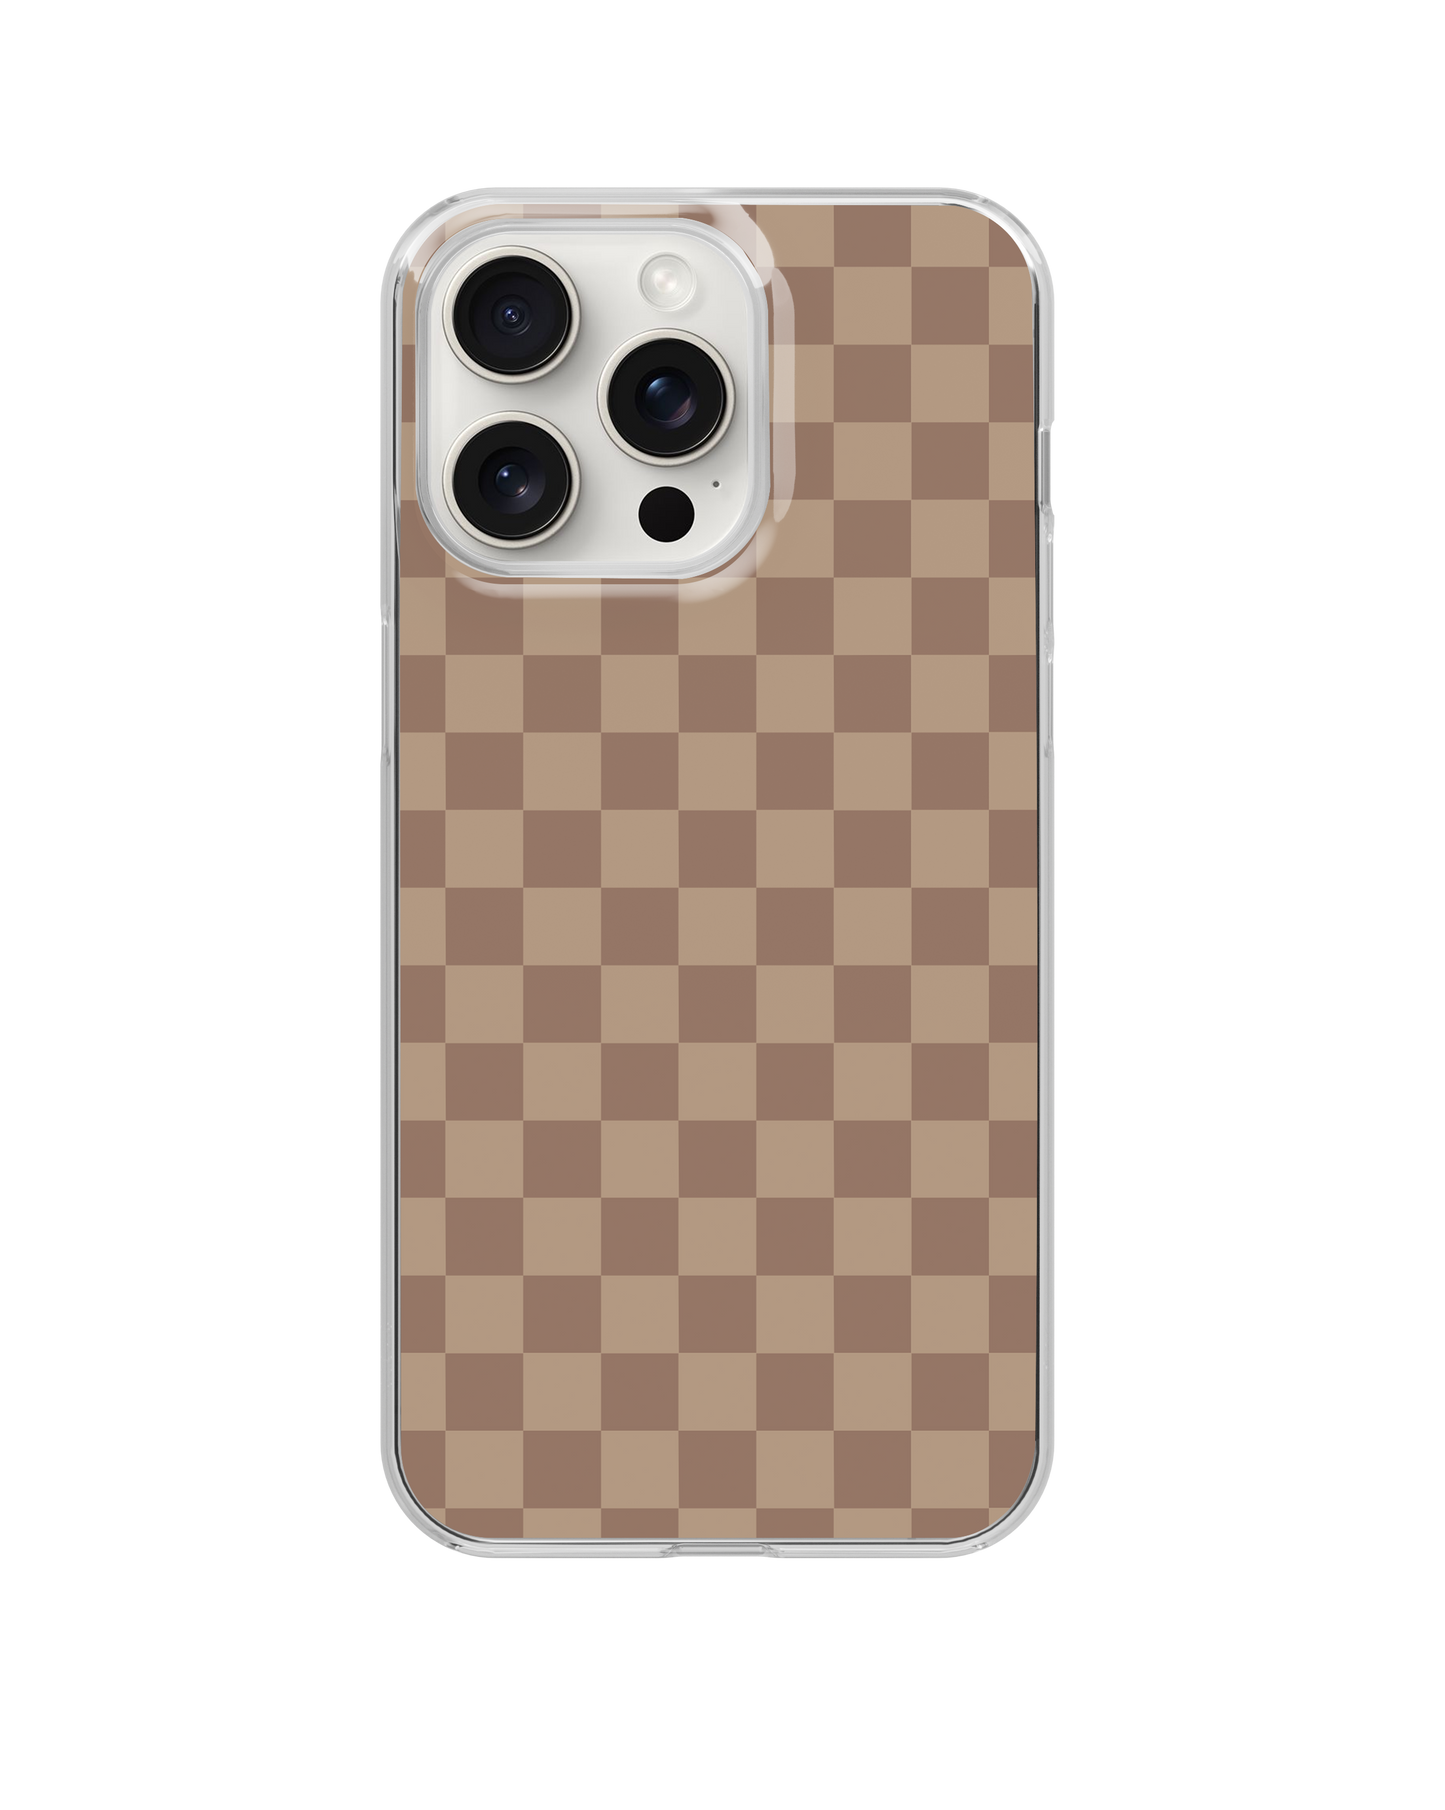 Chestnut Checkers Clear Case Insert